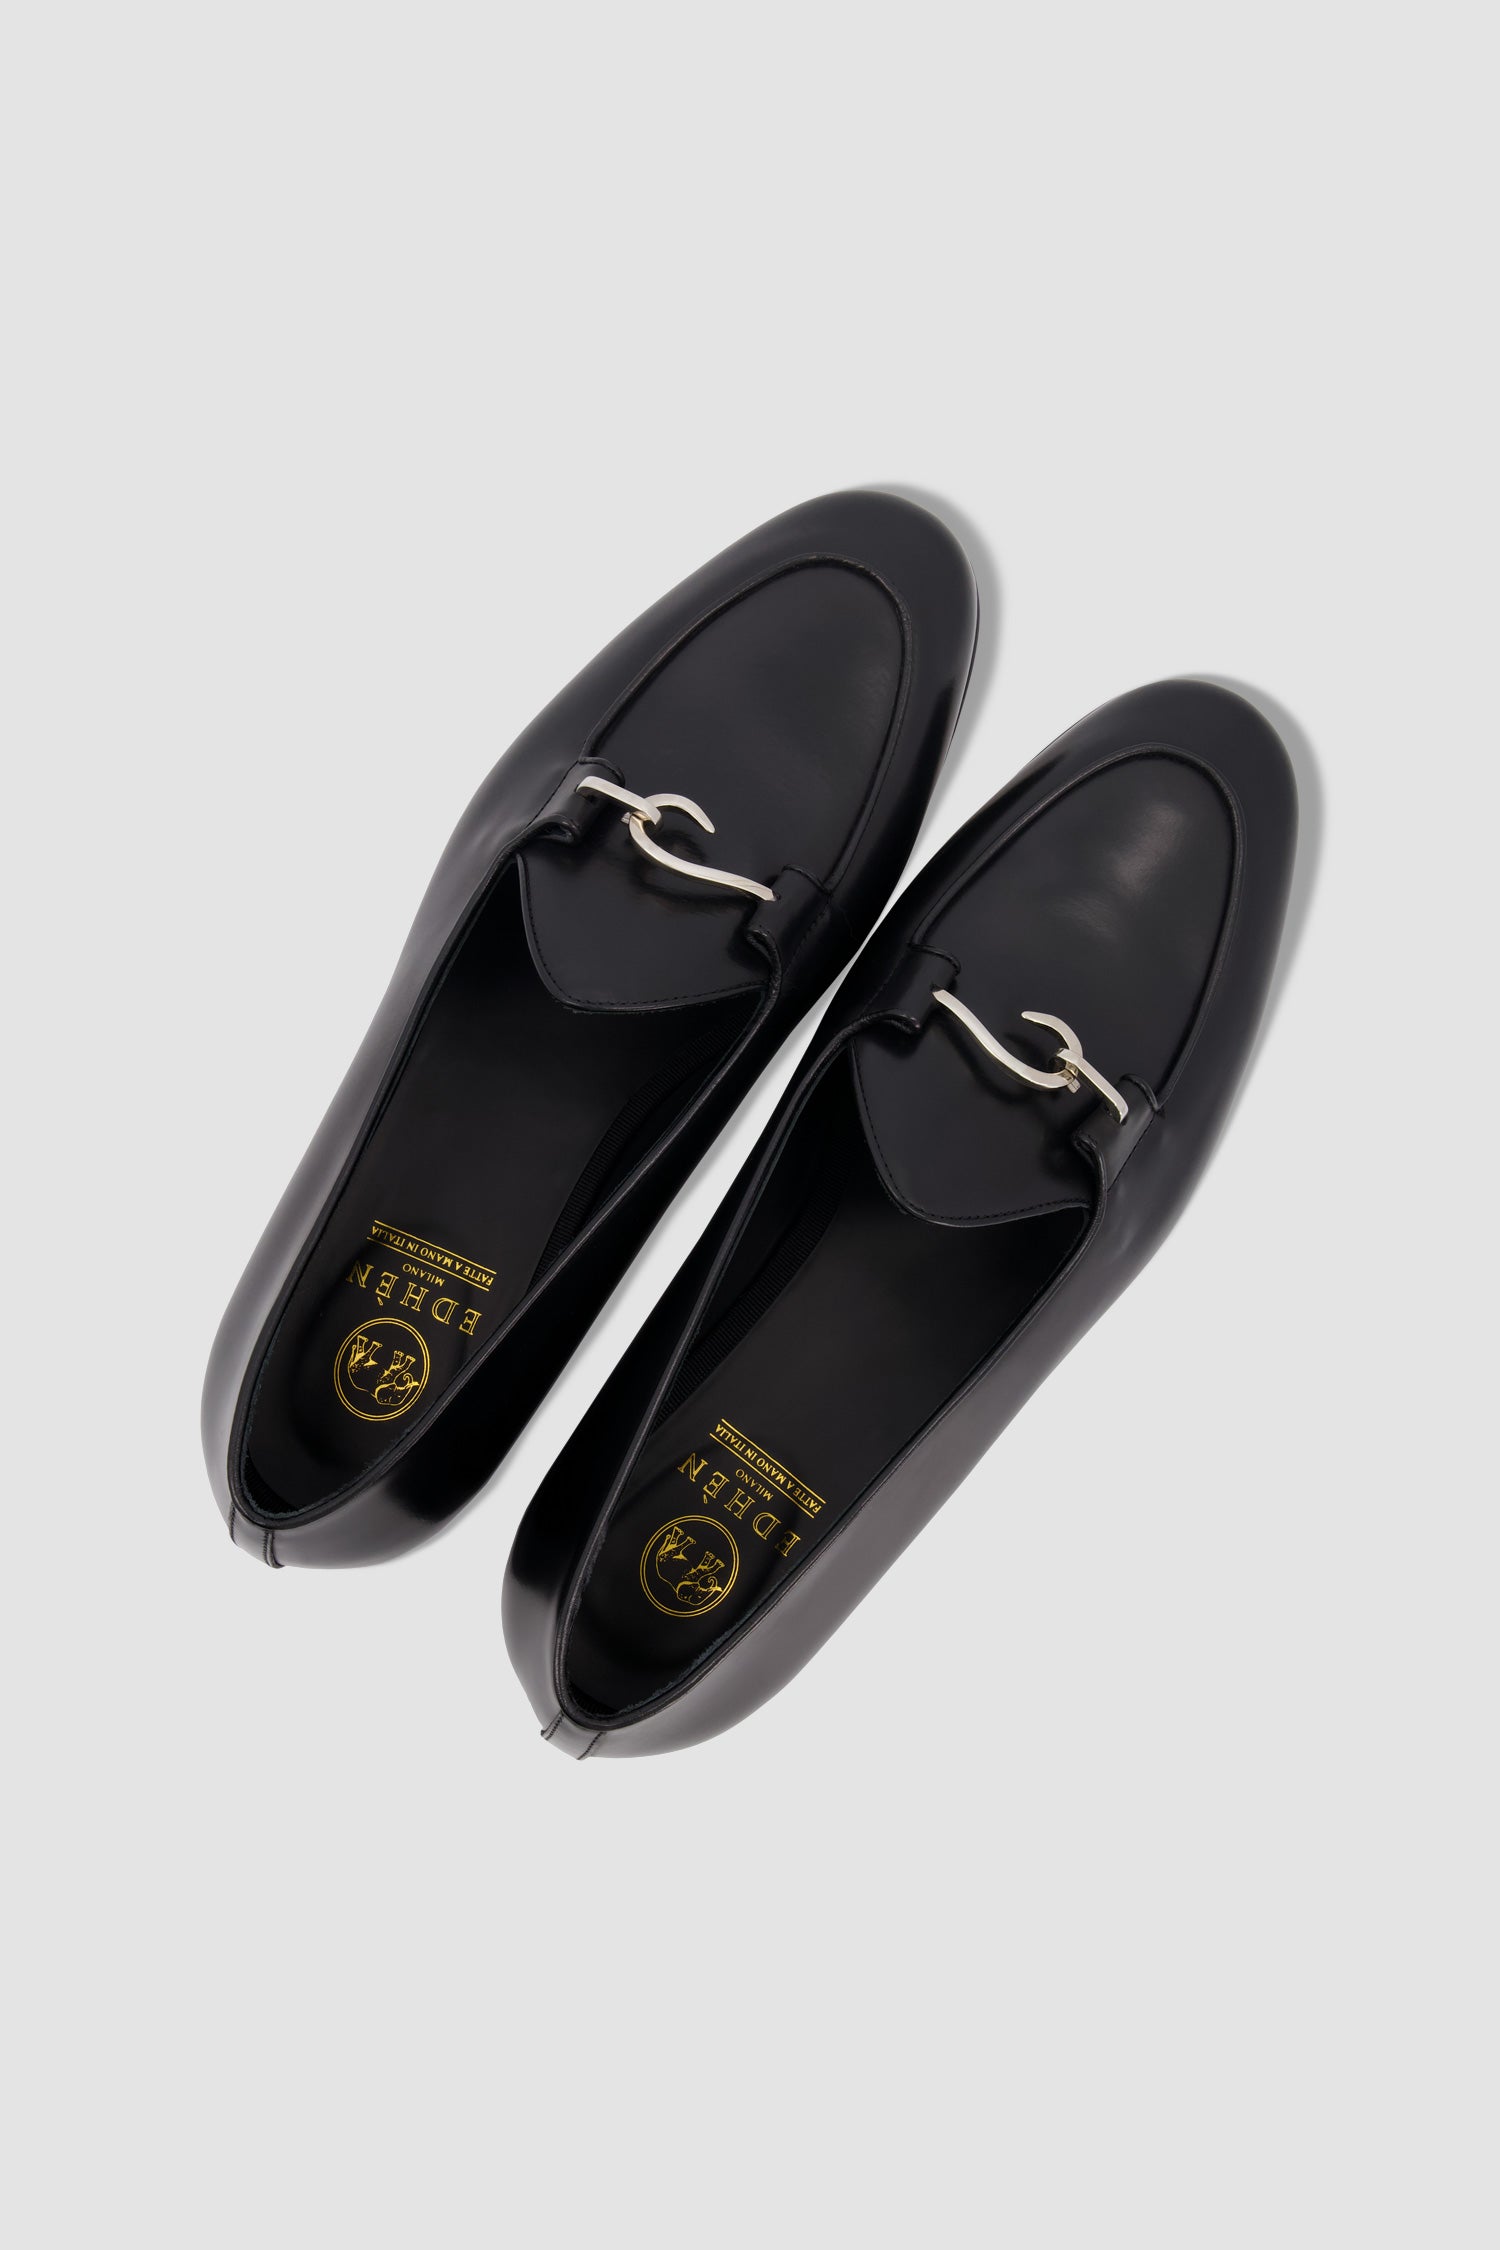 Edhen Milano Comporta Black Leather Loafers